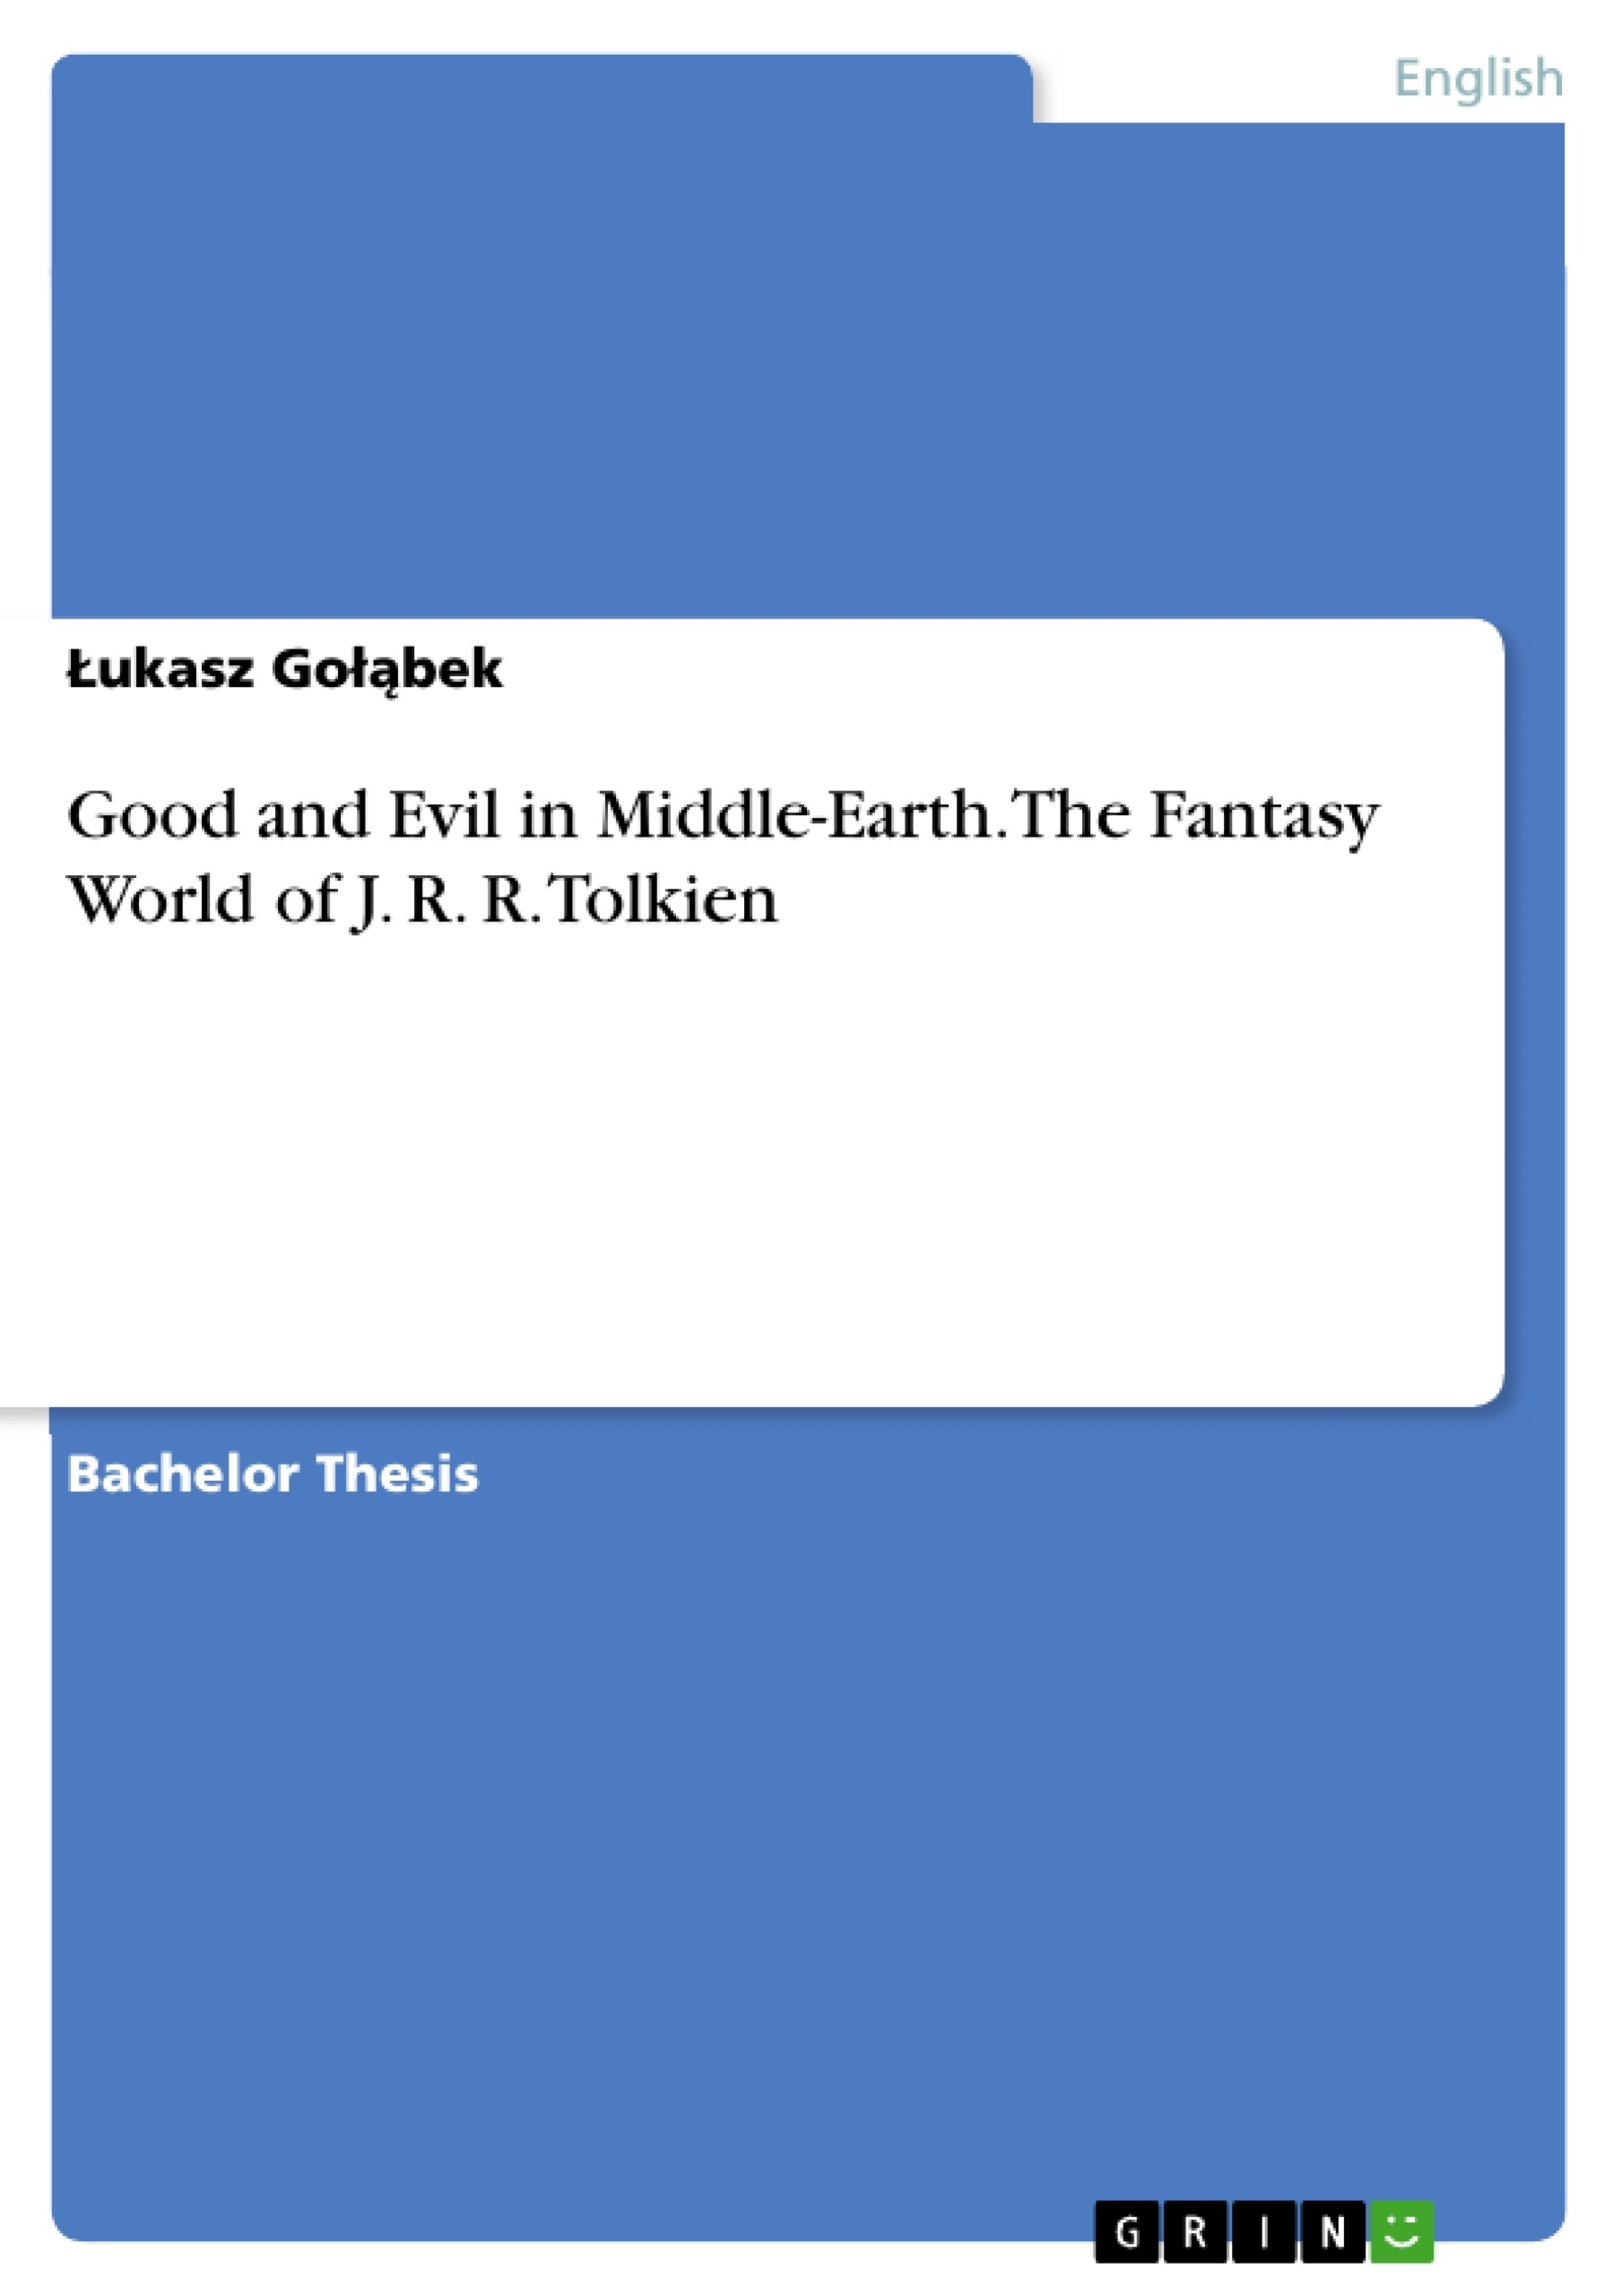 Title: Good and Evil in Middle-Earth. The Fantasy World of J. R. R. Tolkien